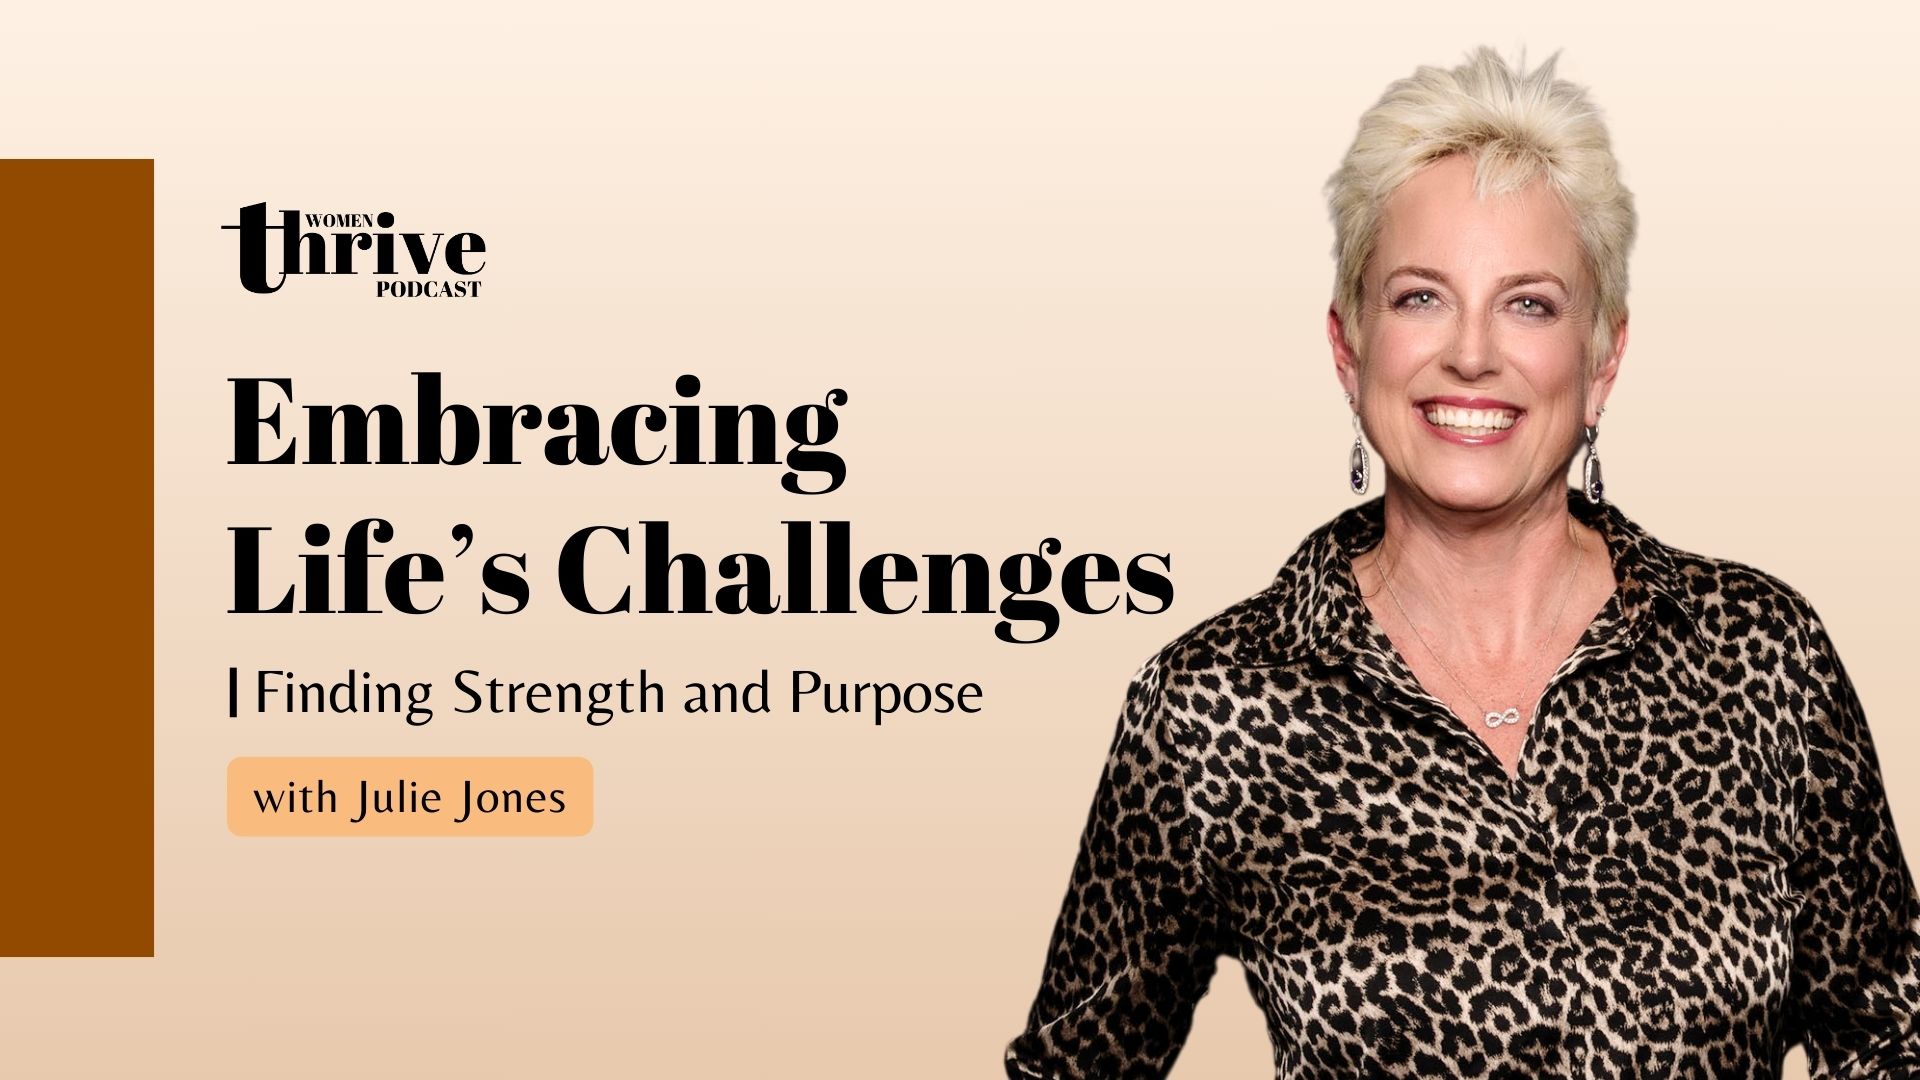 Embracing Life's Challenges: Finding Strength and Purpose with Julie Jones